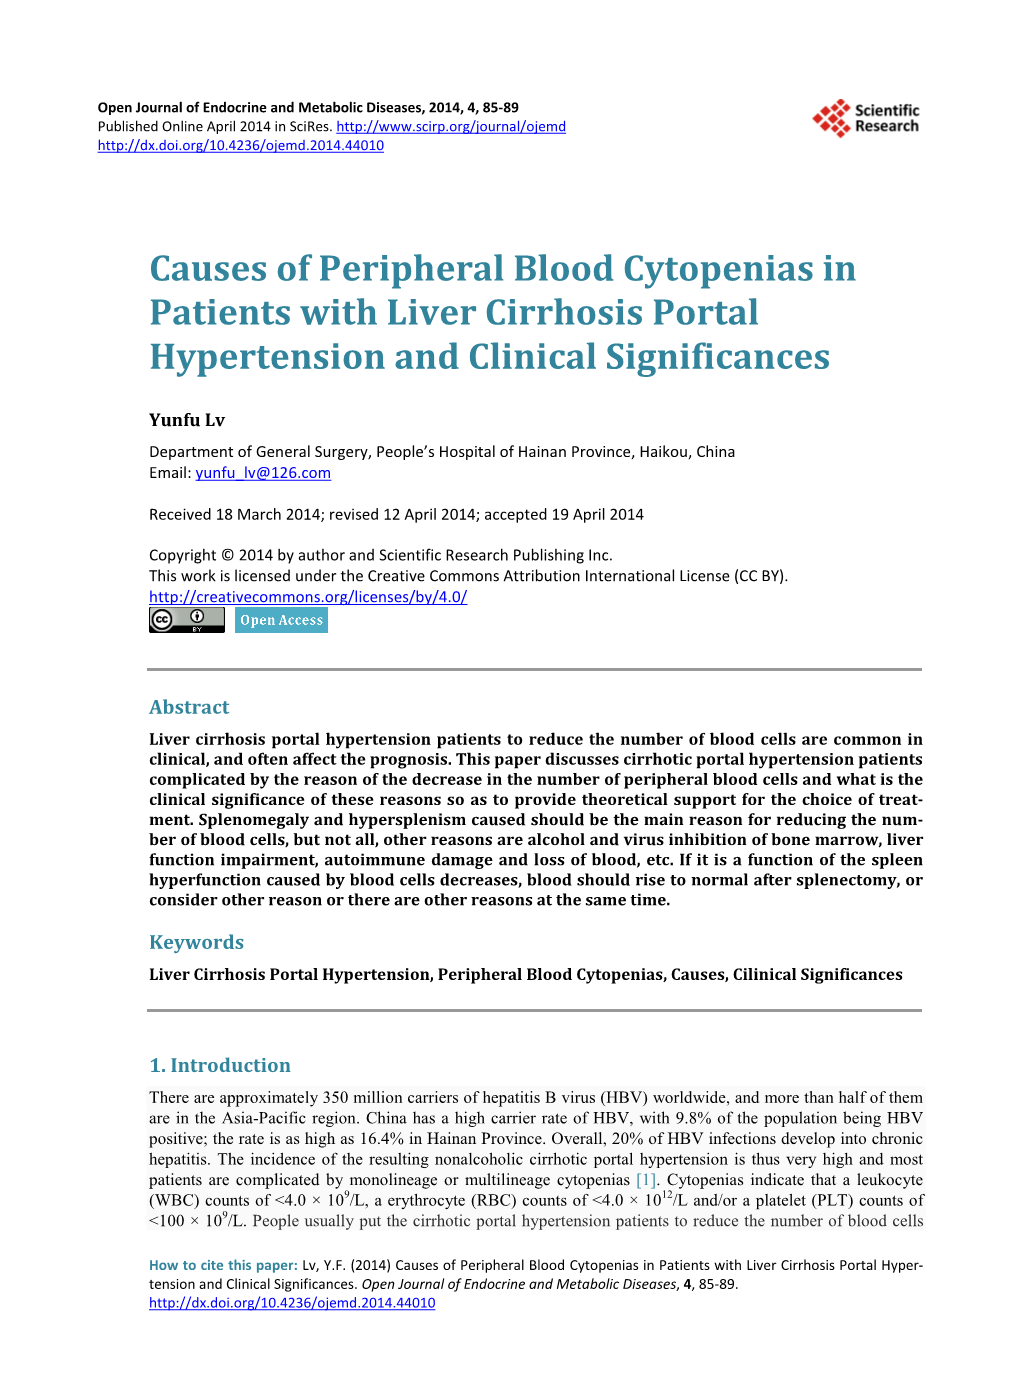 Causes of Peripheral Blood Cytopenias in Patients with Liver Cirrhosis Portal Hypertension and Clinical Significances